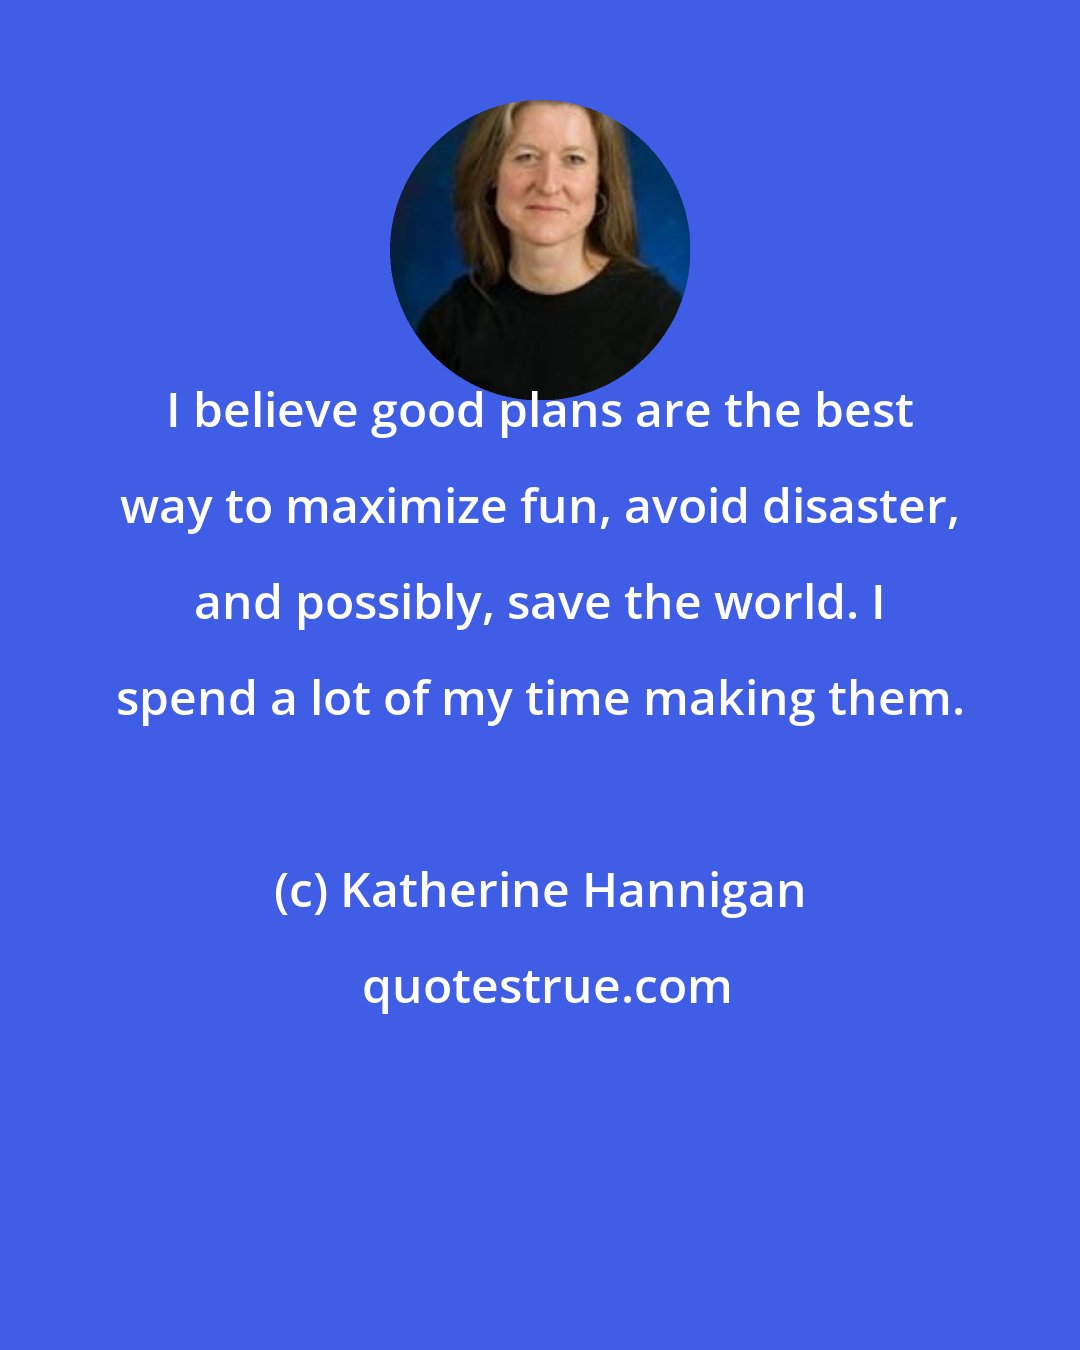 Katherine Hannigan: I believe good plans are the best way to maximize fun, avoid disaster, and possibly, save the world. I spend a lot of my time making them.